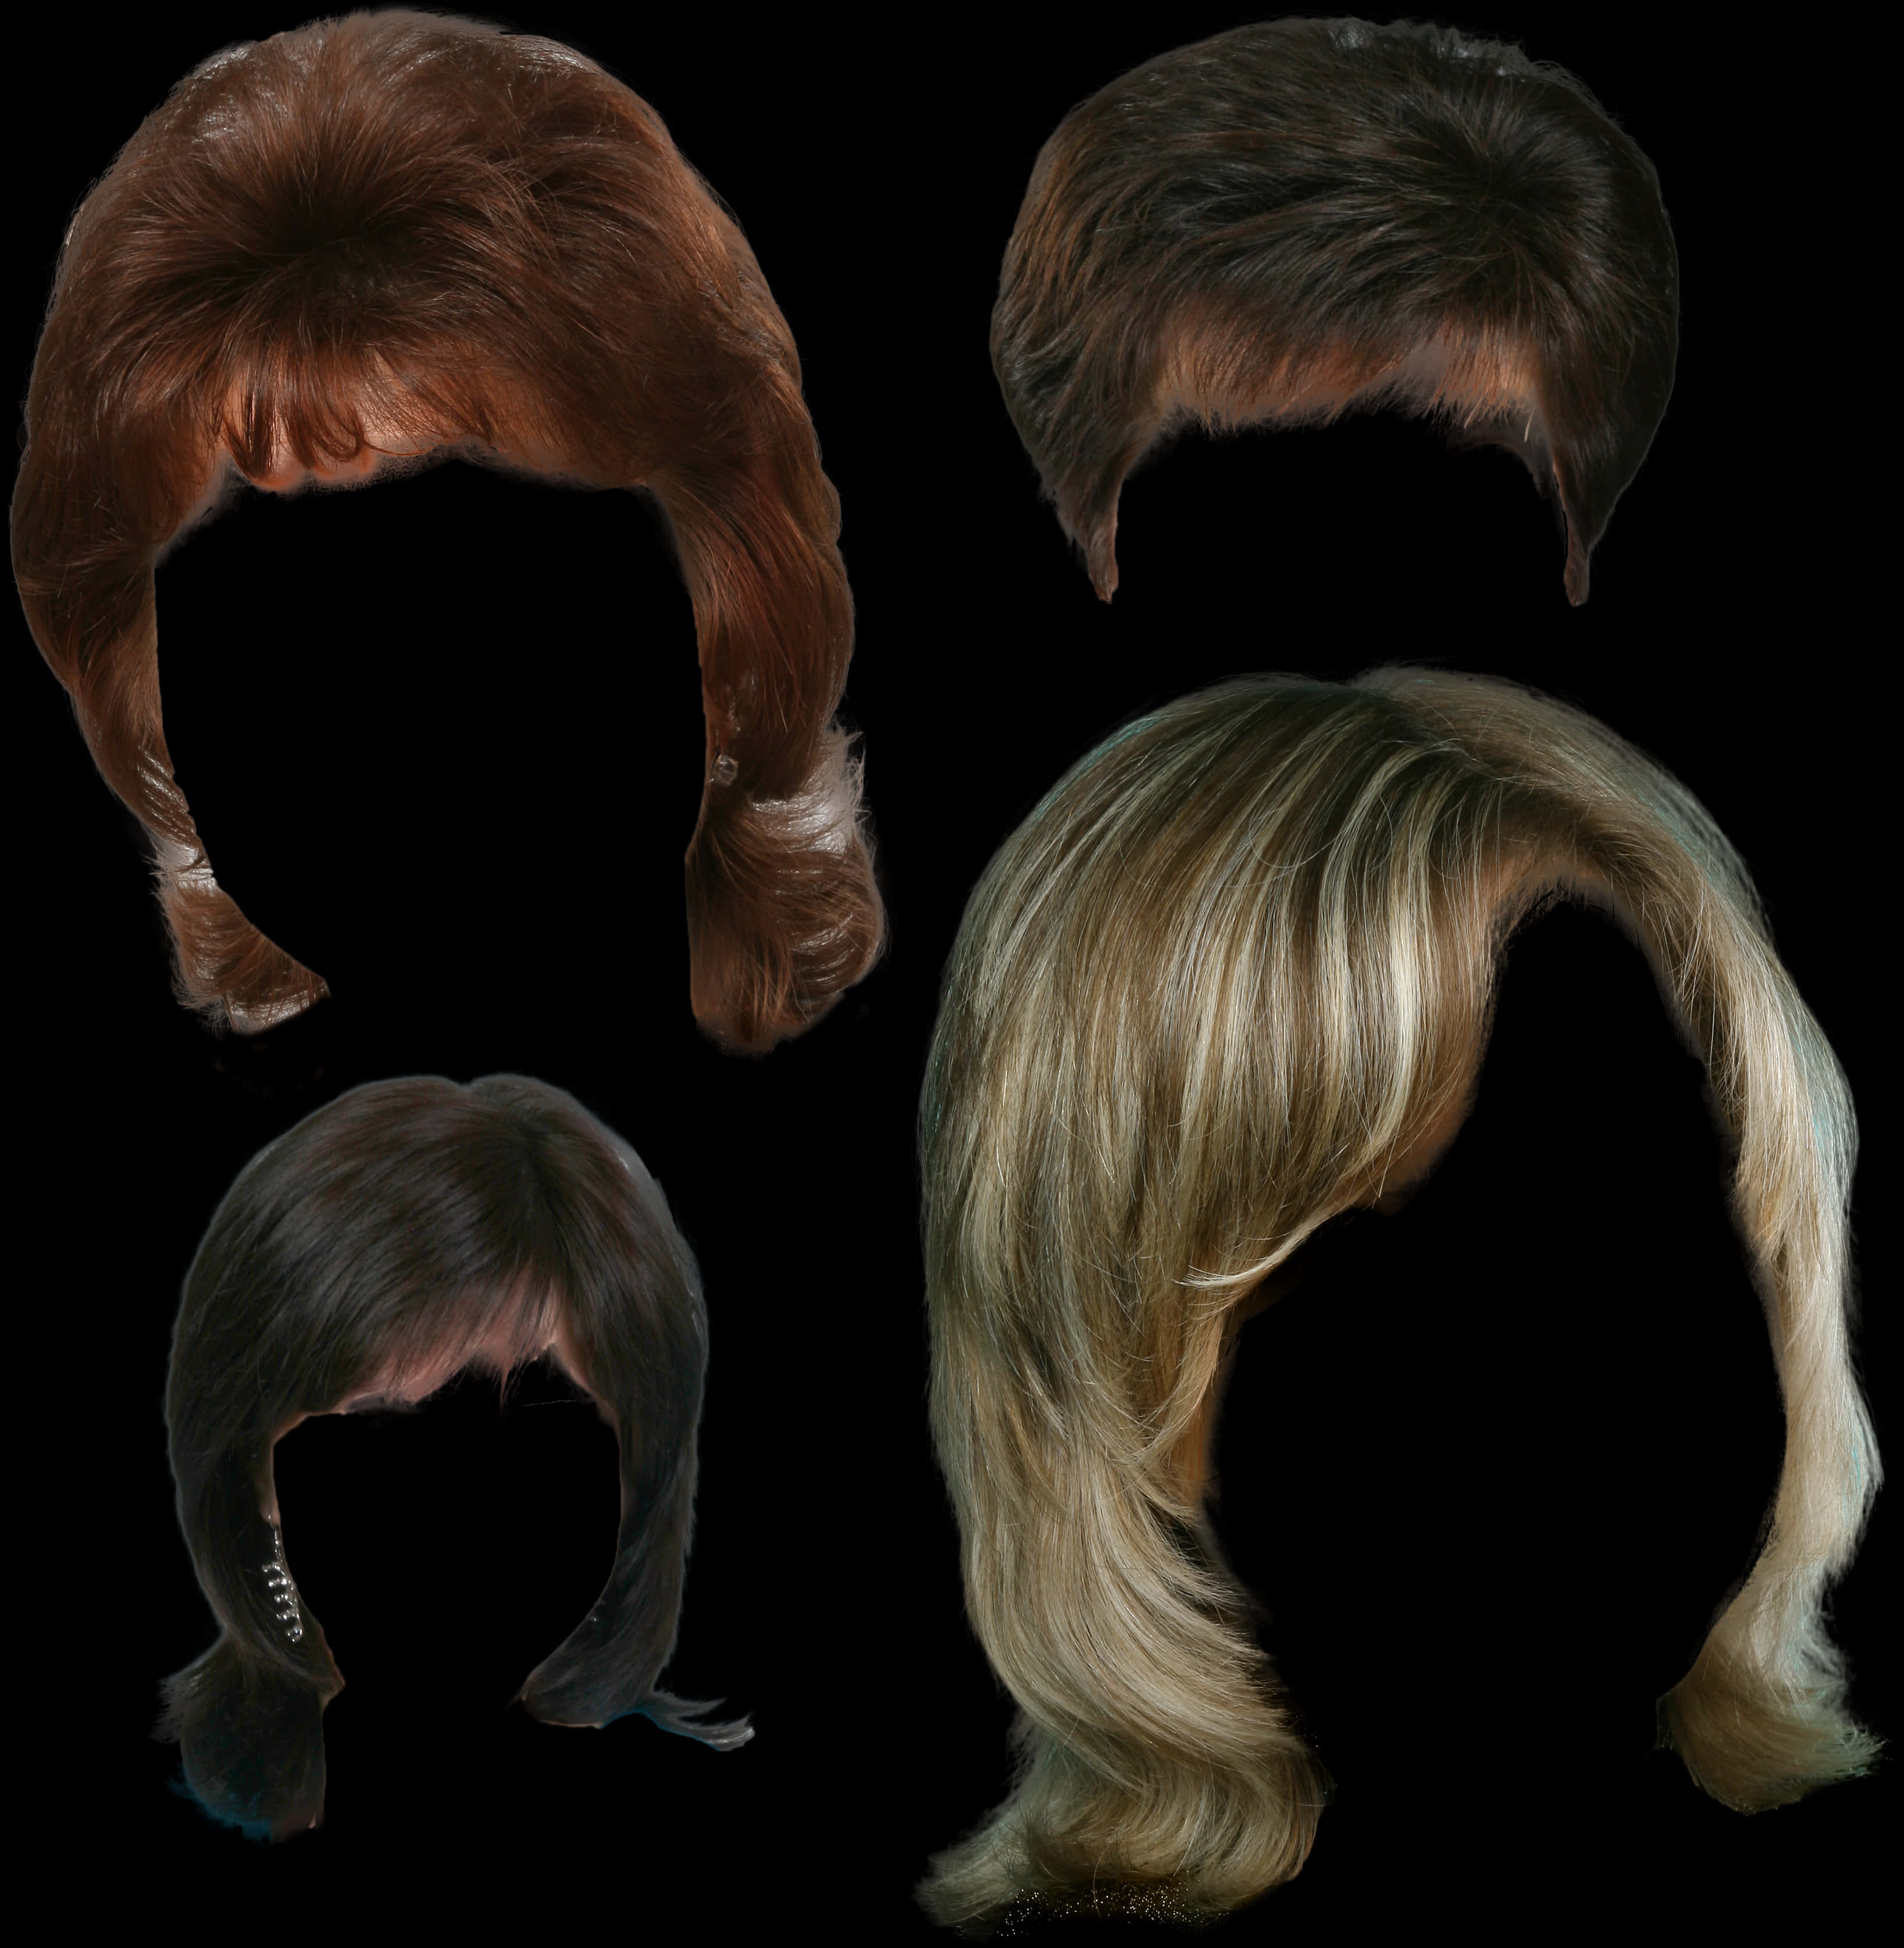 A Group Of Different Hair Styles